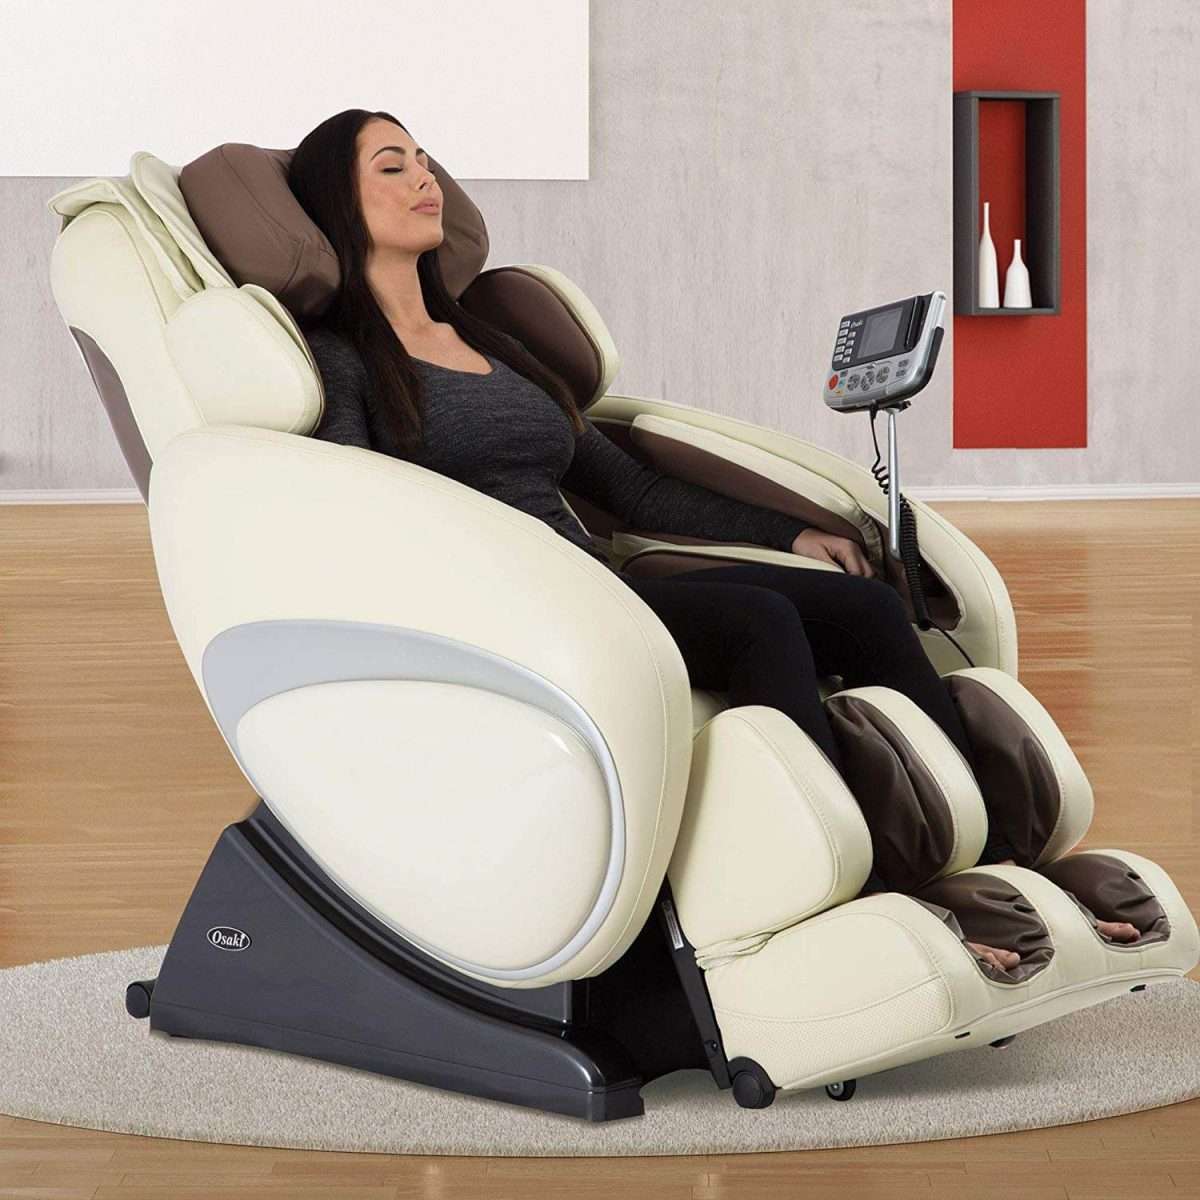 Top 10 Best Full Body Air Massage Chairs Review